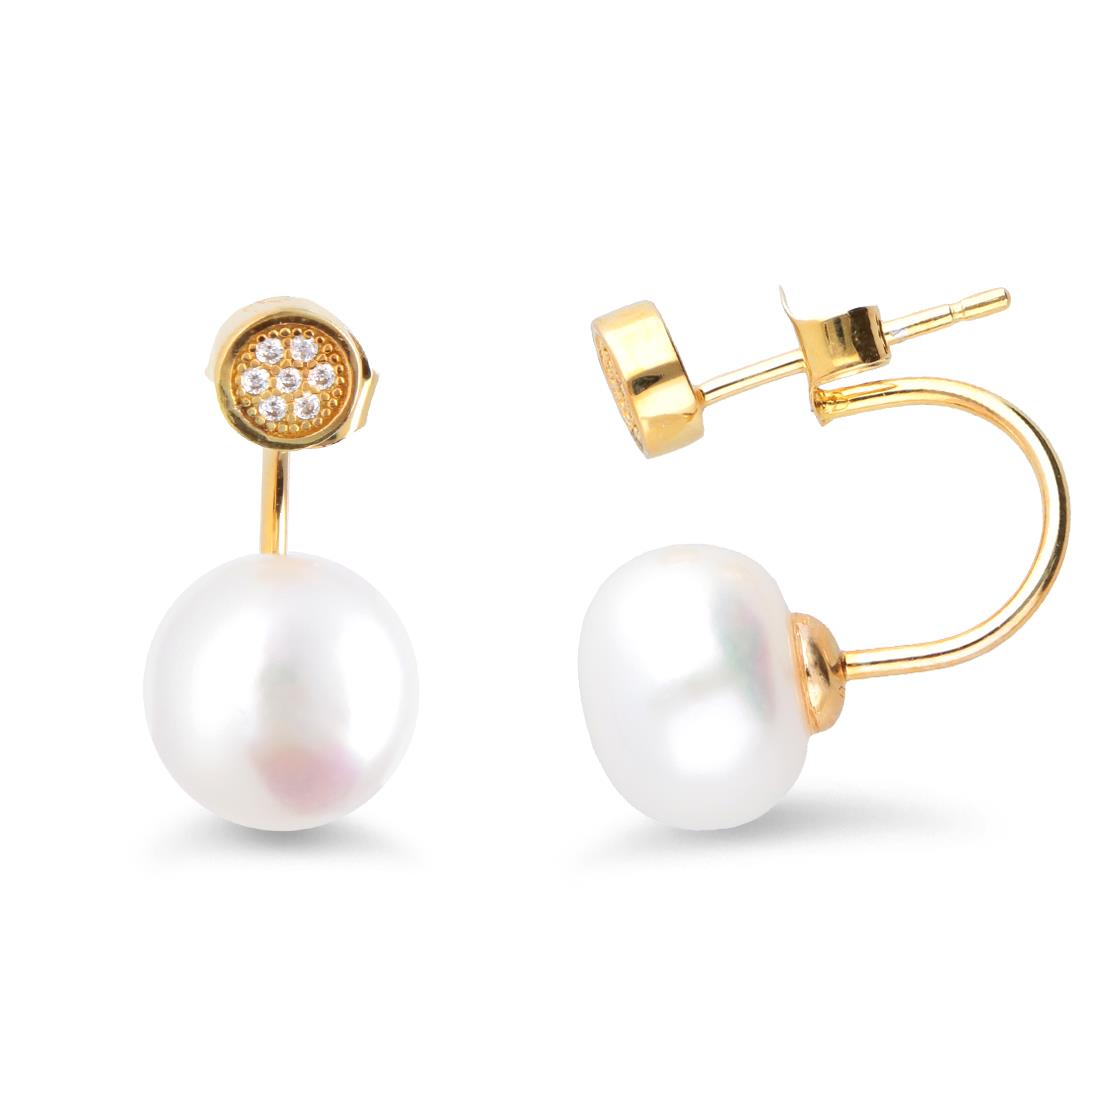 Golden silver earrings with button pearl and zircons - MAYUMI